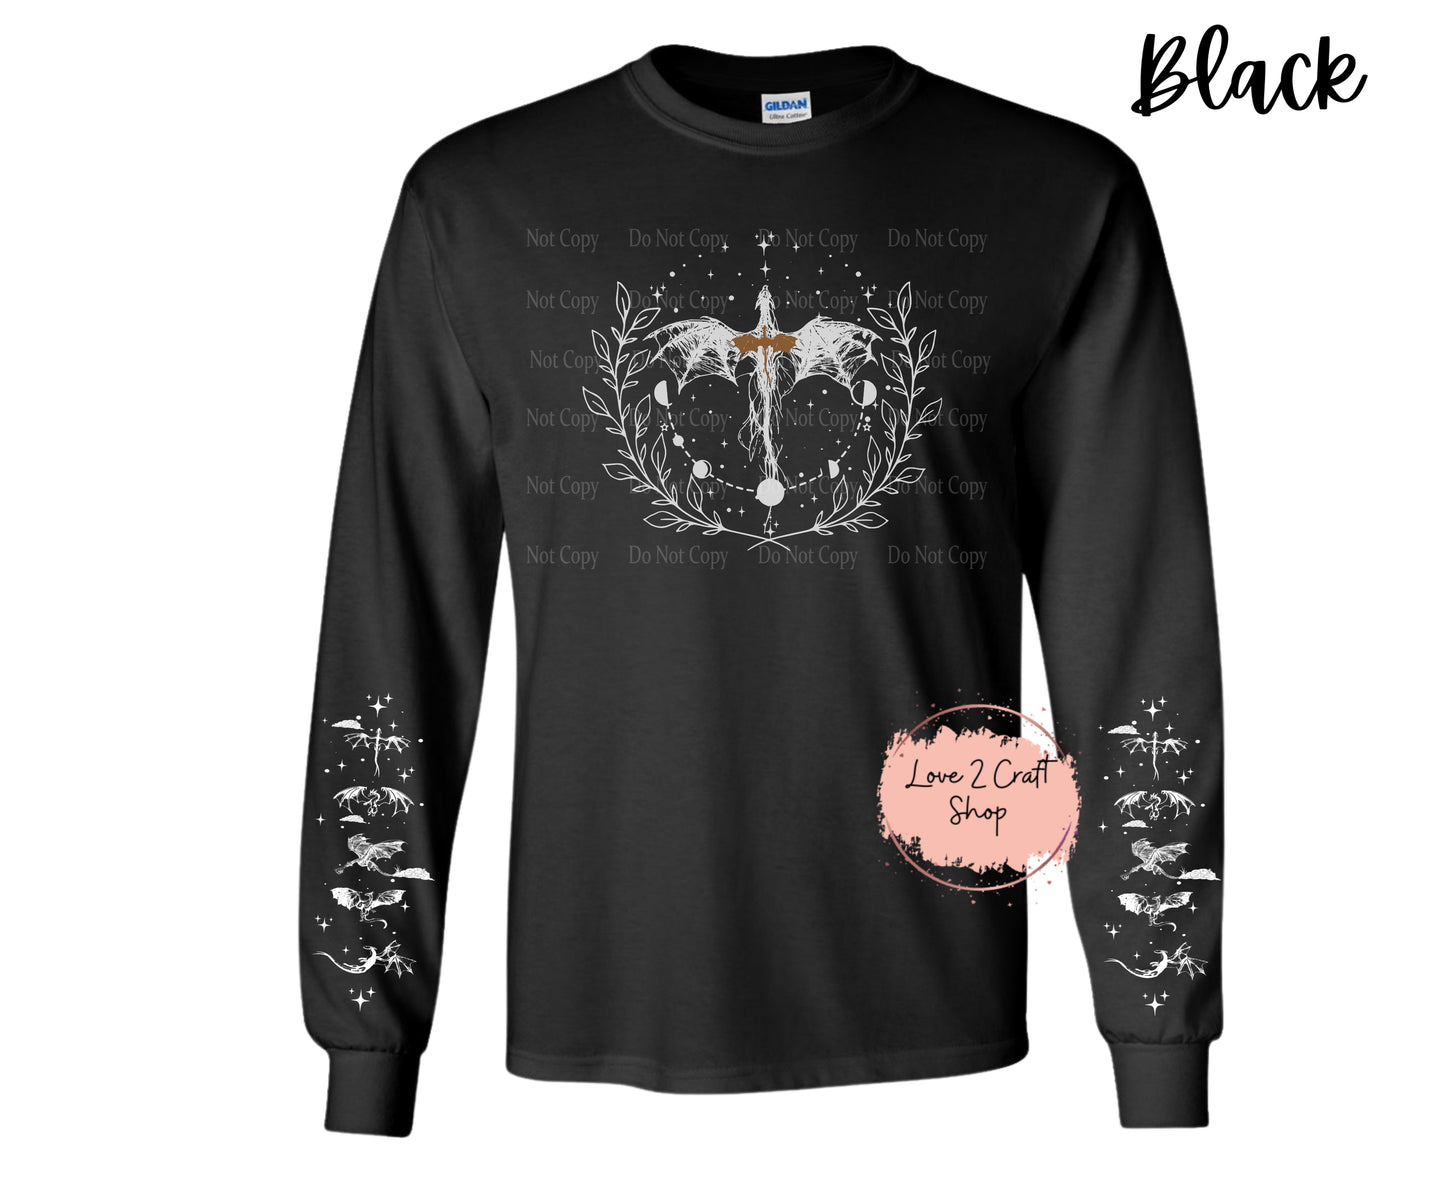 Fourth Wing with Sleeve images Long Sleeve